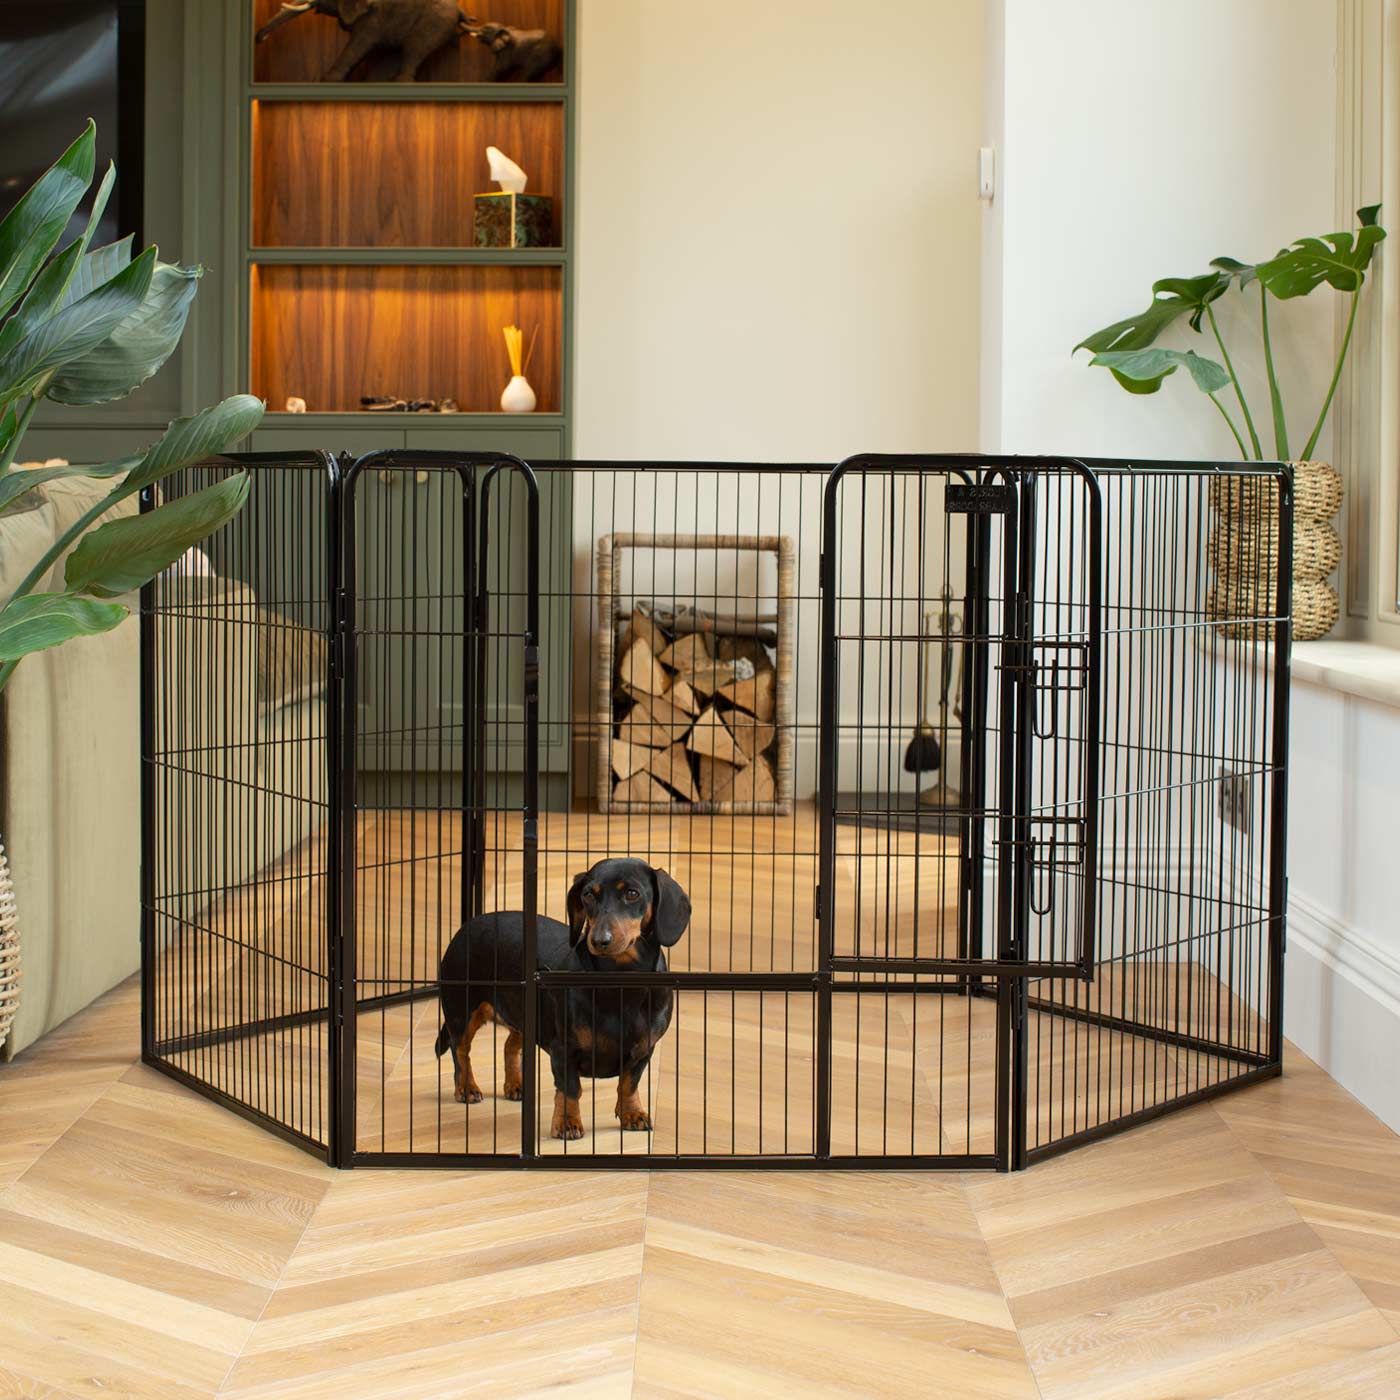 Ensure The Ultimate Puppy Safety with Our Heavy Duty 80cm High Black Metal Play Pen, Crafted to Take Your Pet Right Through Maturity! Powder Coated to Be Extra Hardwearing! 6 panels that are 80cm high and attachments to connect to any Cage. The modular system allows you to change the puppy pen shape with multiple layouts! Available To Now at Lords & Labradors US